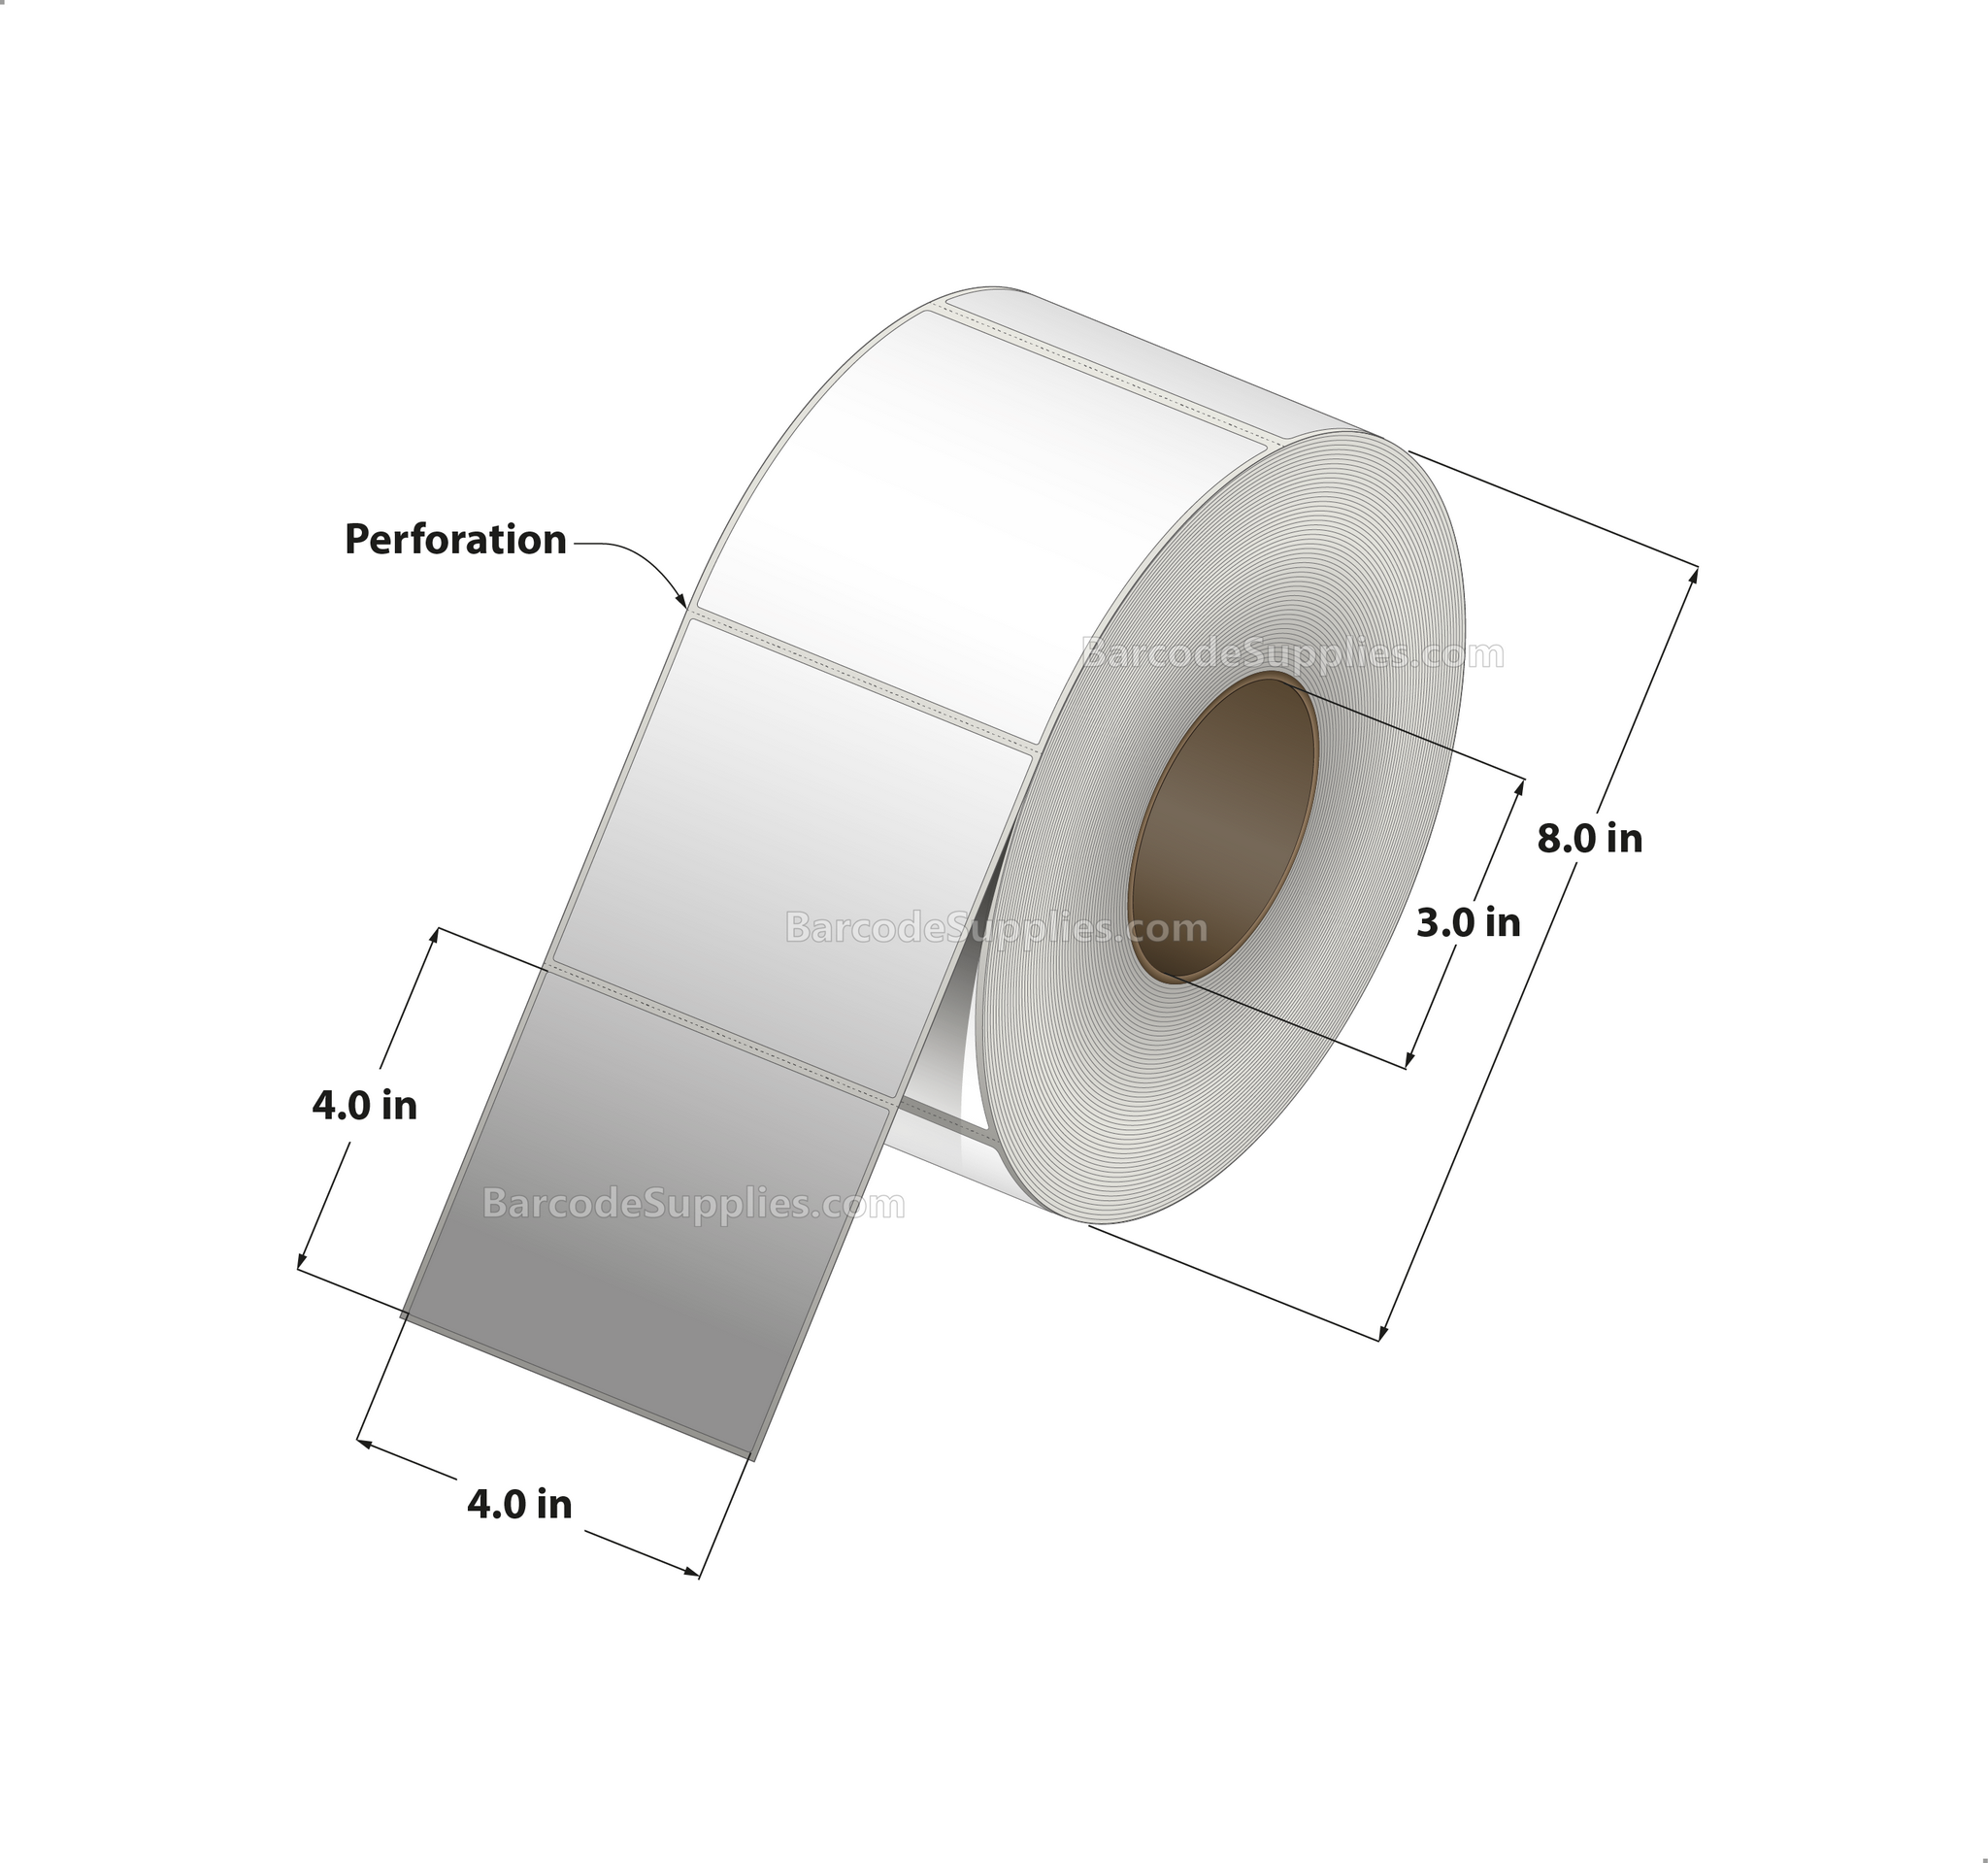 4 x 4 Thermal Transfer White Labels With Permanent Adhesive - Perforated - 1500 Labels Per Roll - Carton Of 4 Rolls - 6000 Labels Total - MPN: RSP-4-4-1500-3